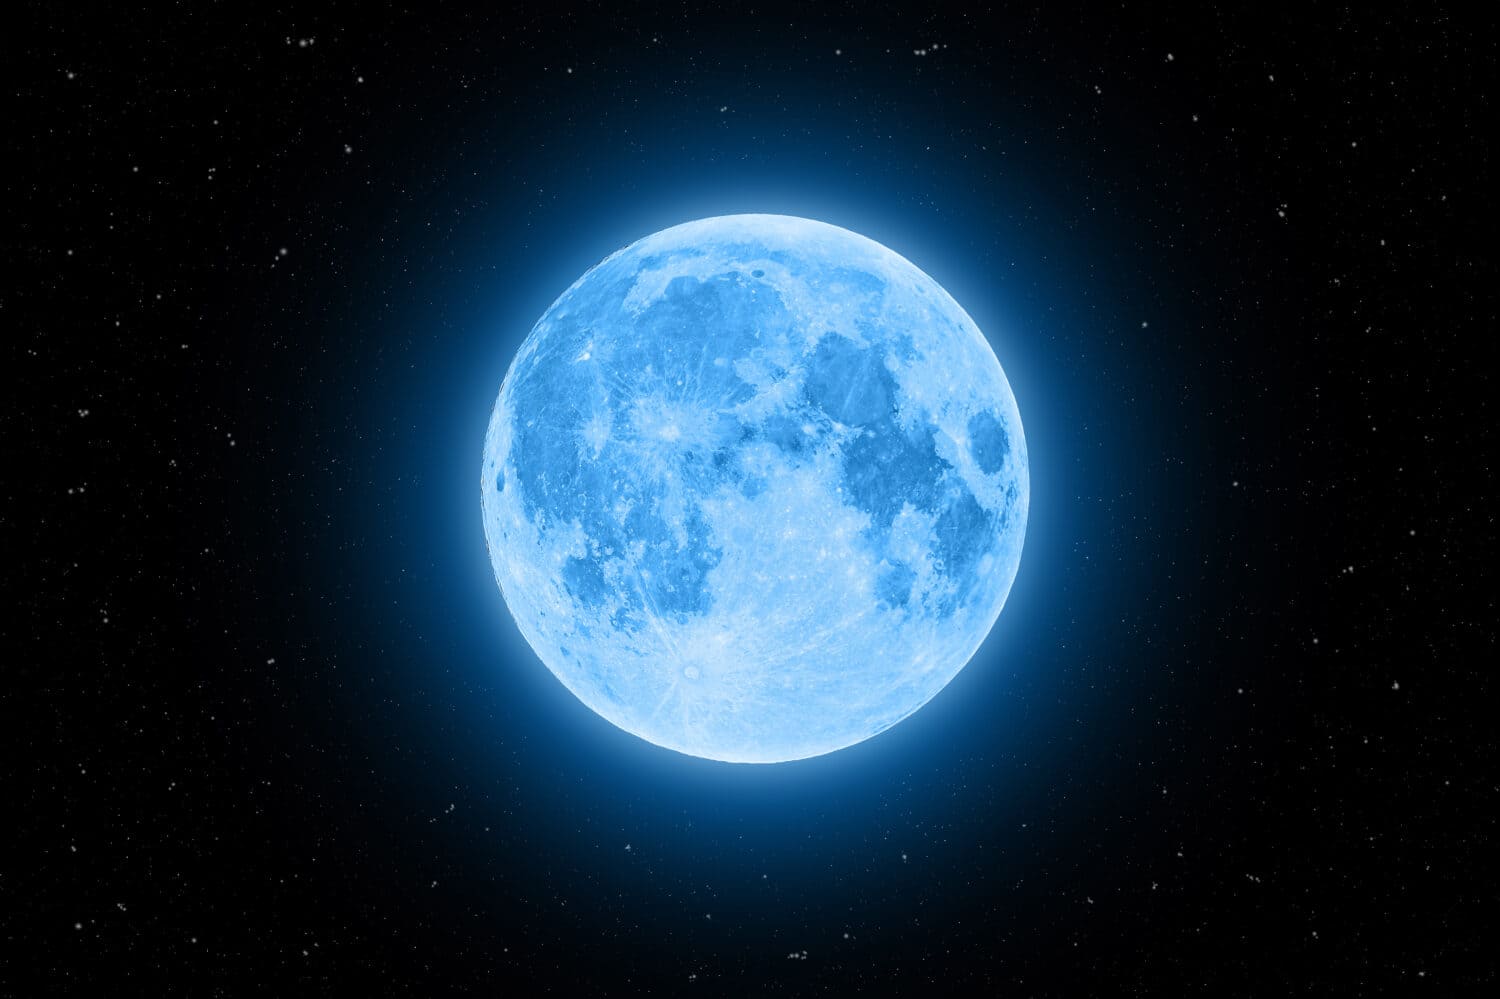 Blue super moon glowing with blue halo surrounded by stars on black sky background